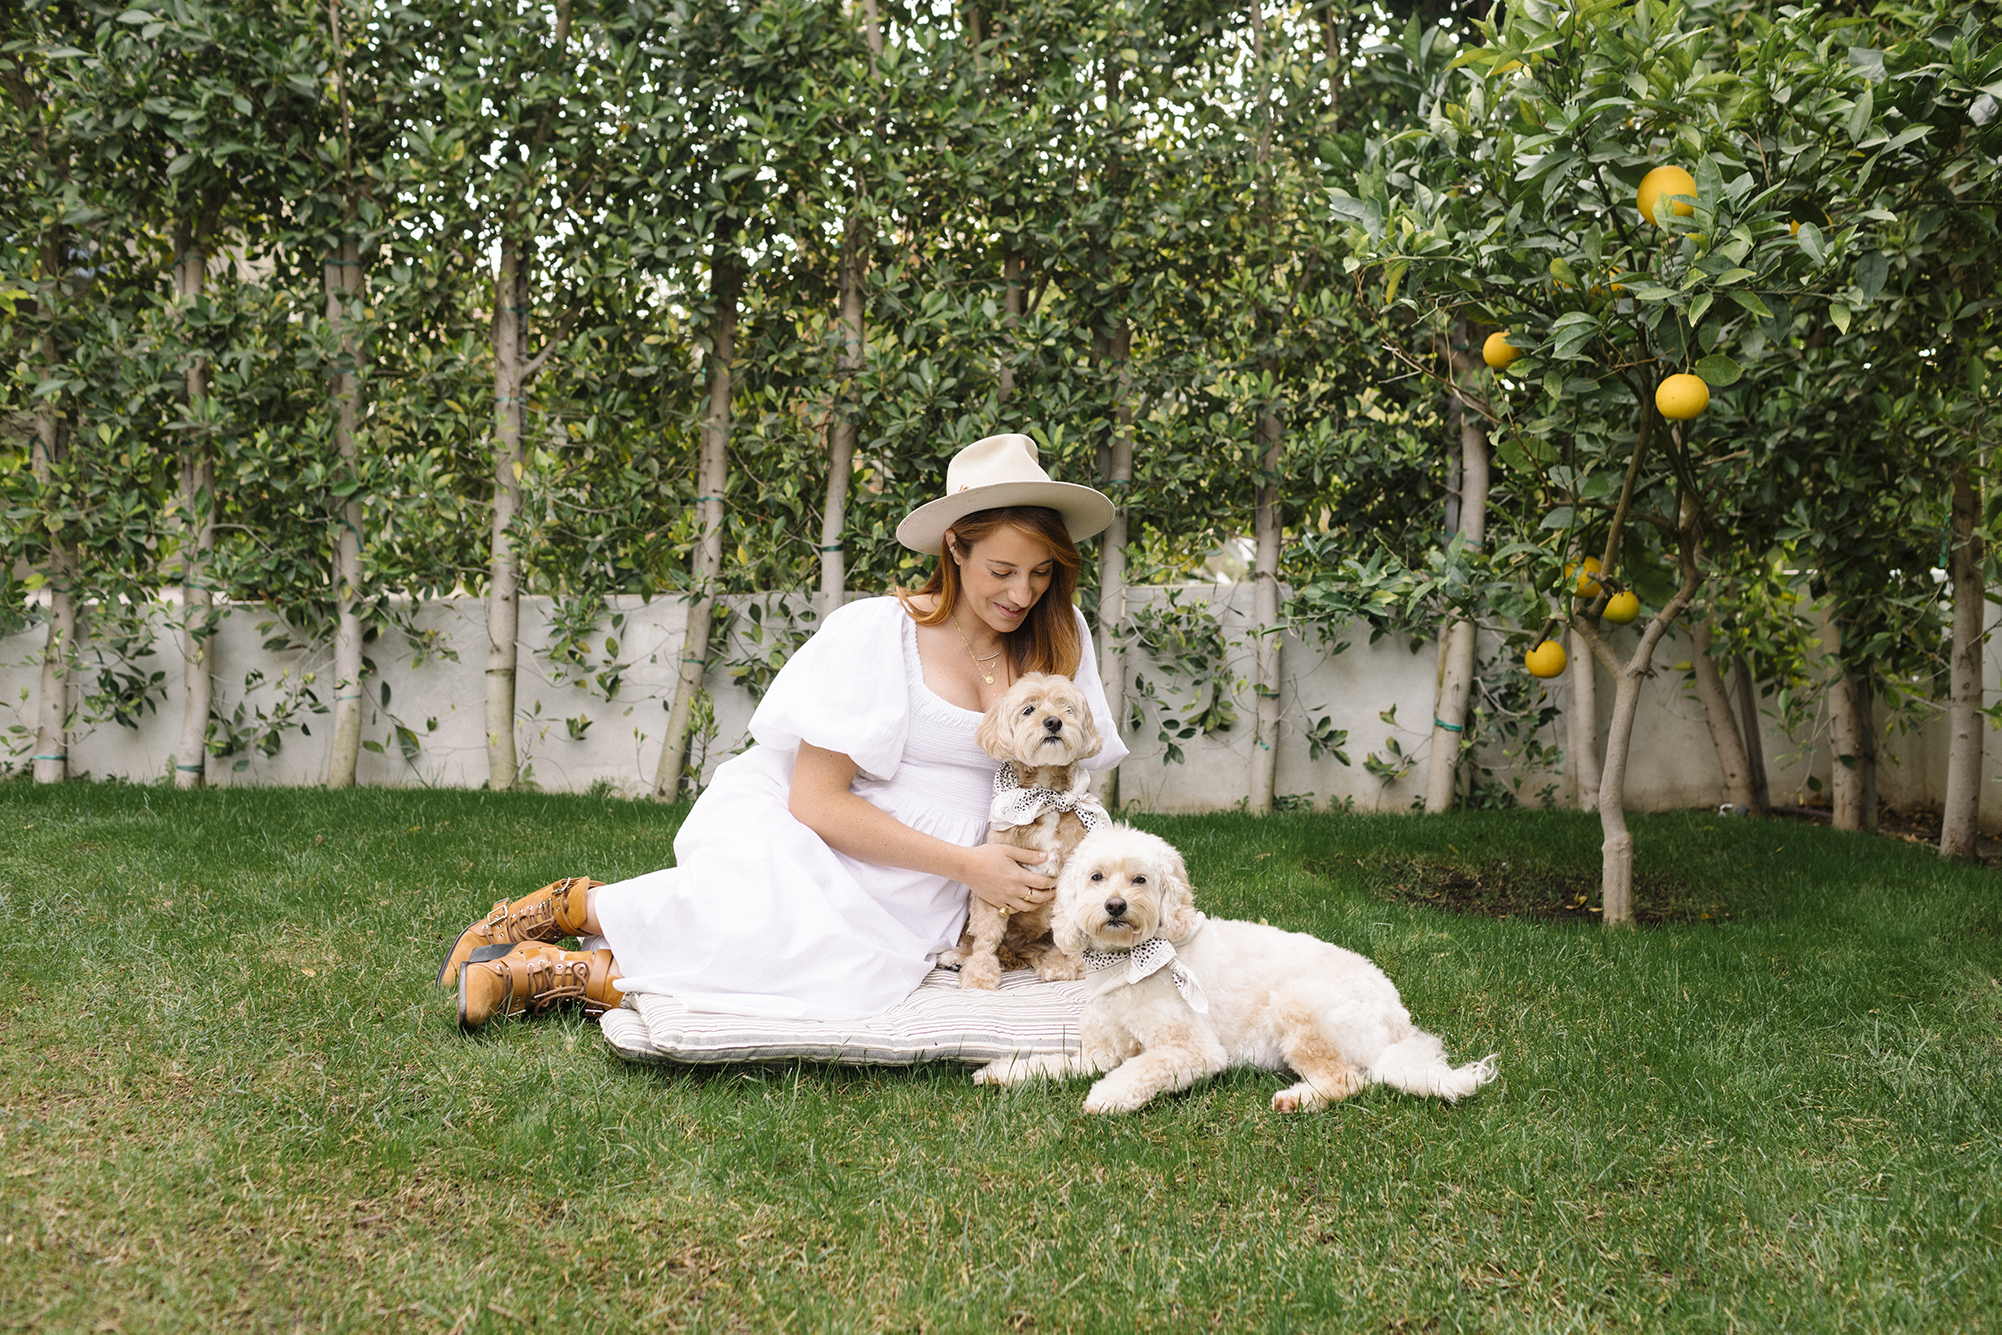 West-Bourne chef and restauranteur Camilla Marcus and her Cockapoo dogs, Teddy and Charlie.